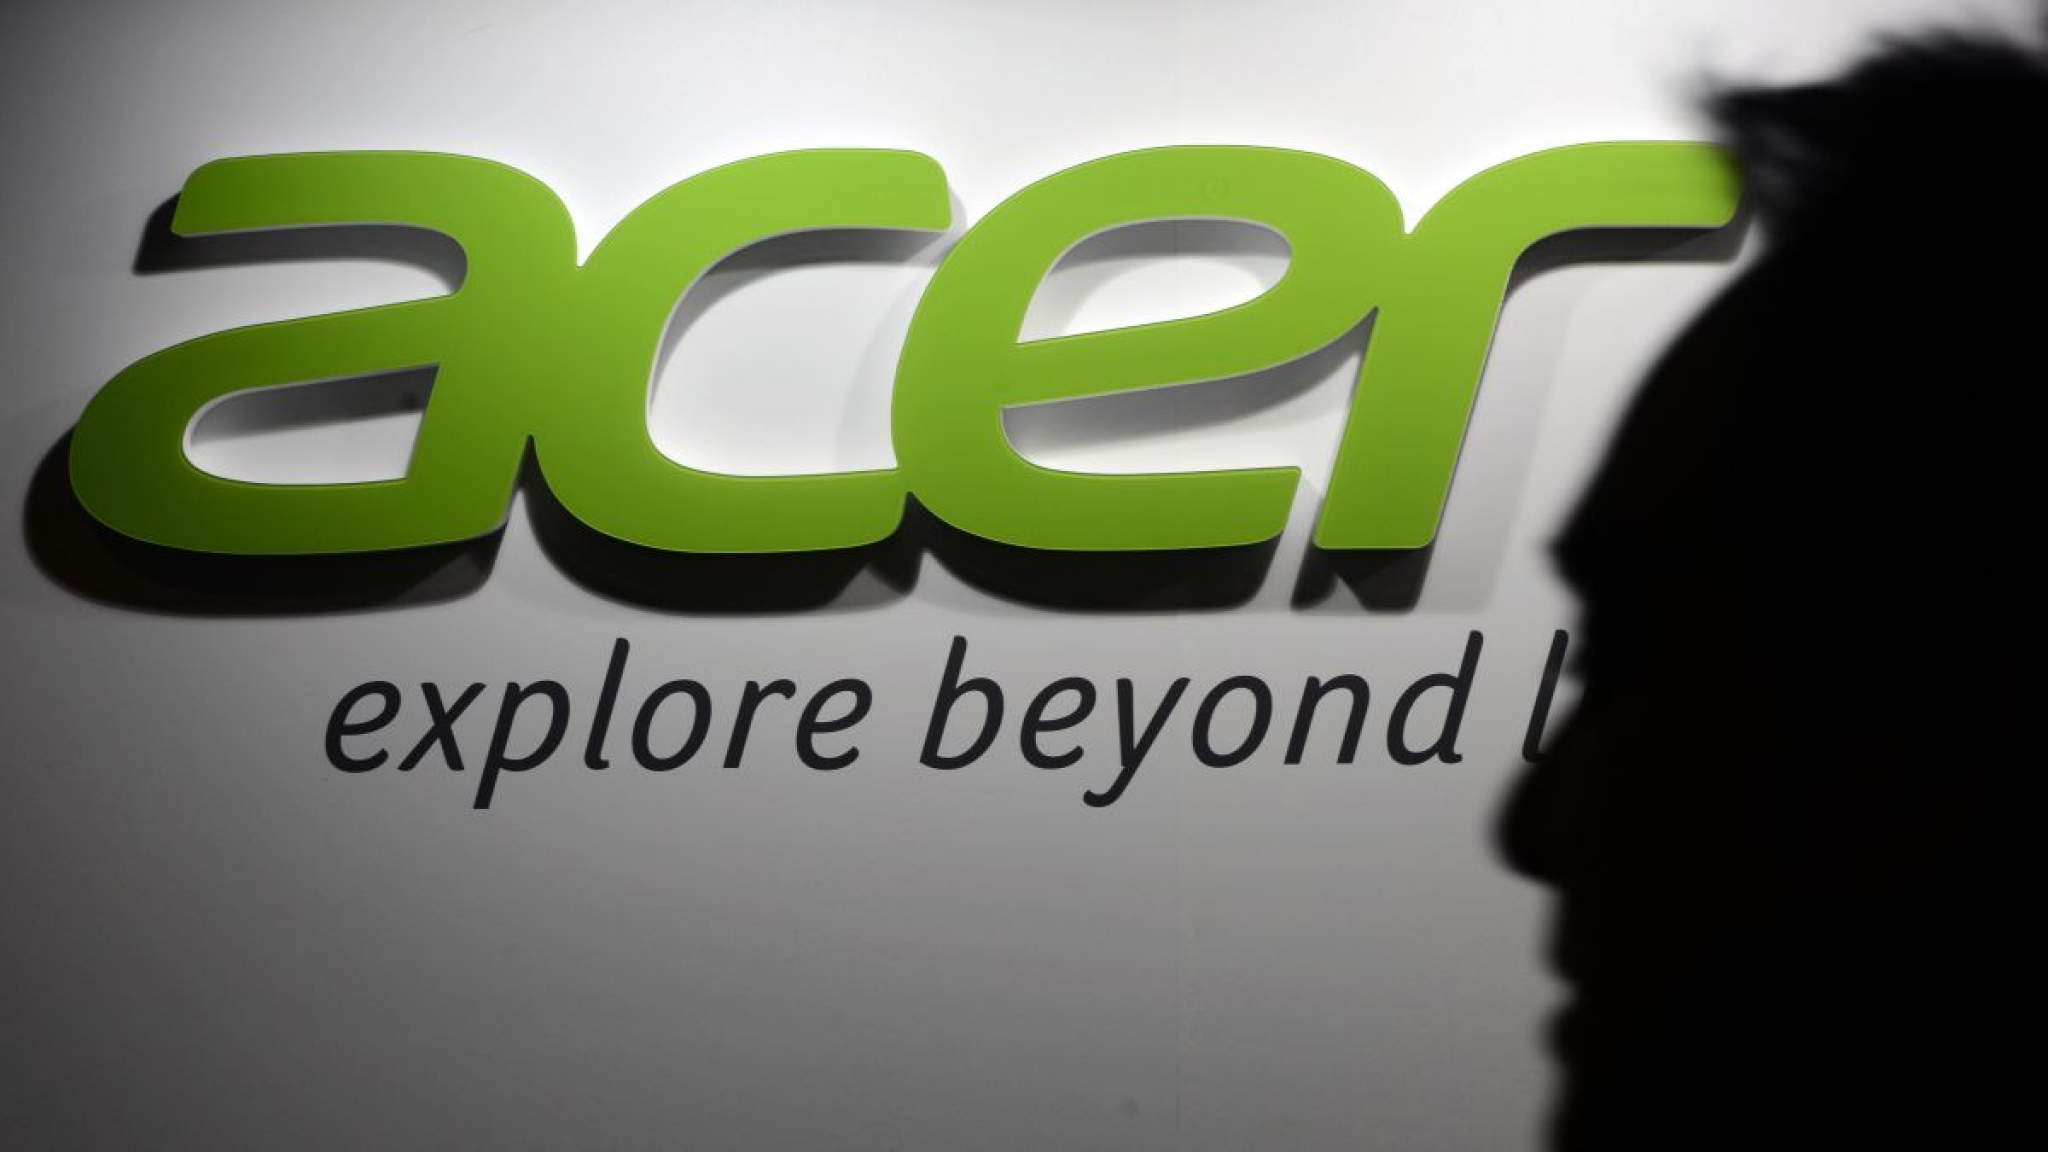 Acer Reportedly Hit With $50M Ransomware Attack, Says Companies Like It ‘Are Constantly Under Attack’